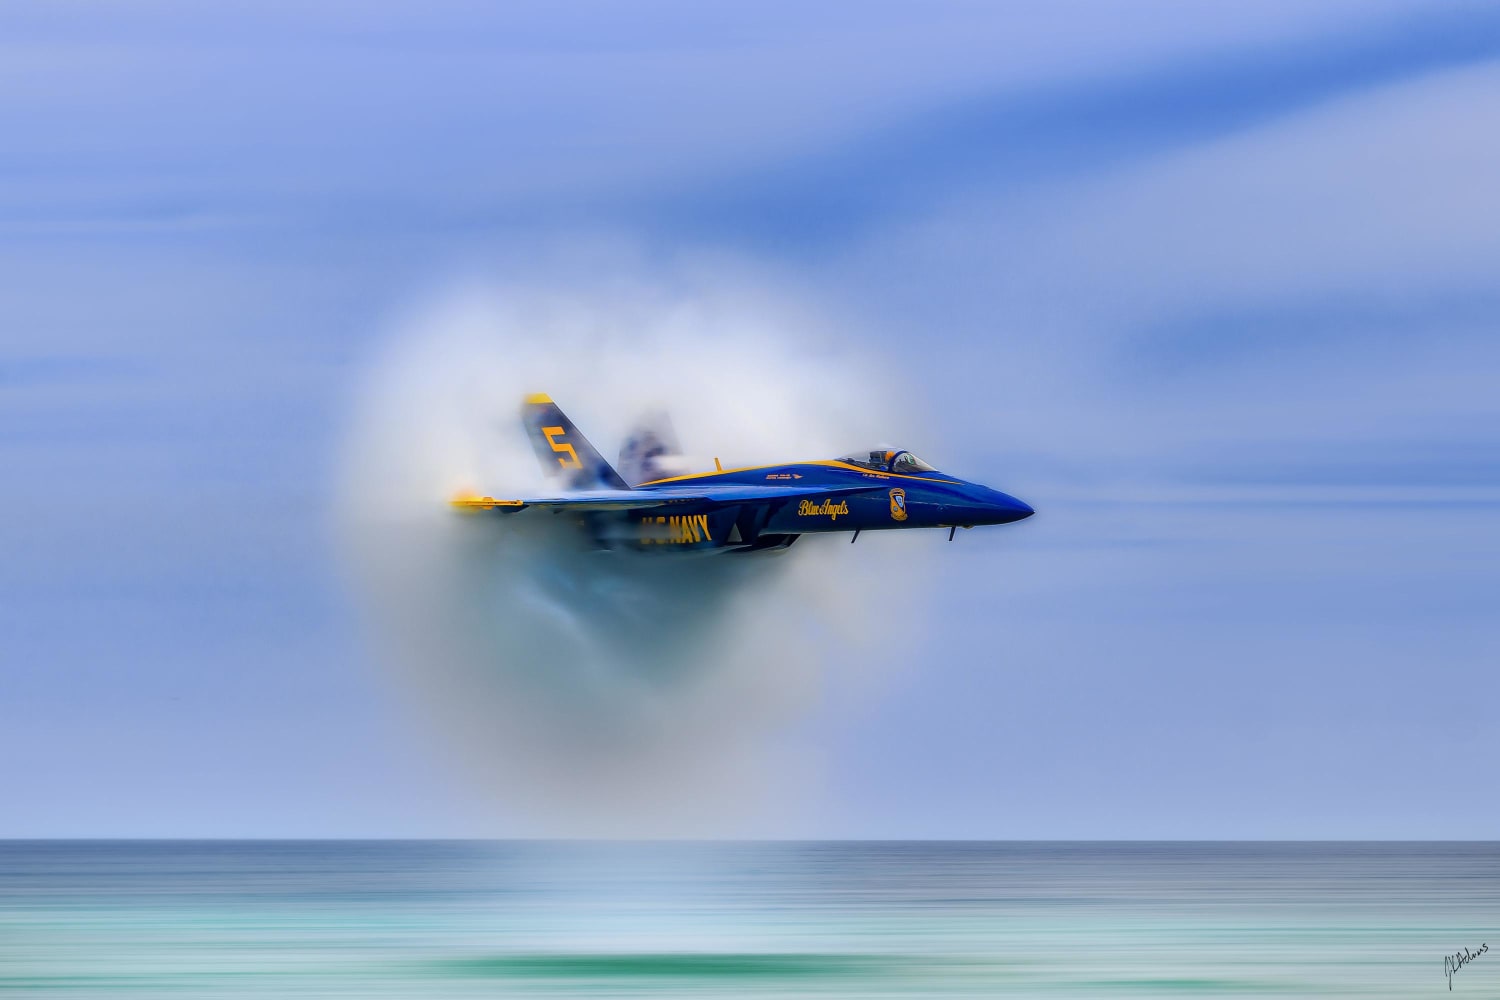 This photo I took of a Blue Angels sneak pass was part of a Christmas gift to the pilot. This is the current highlight of my photography career!